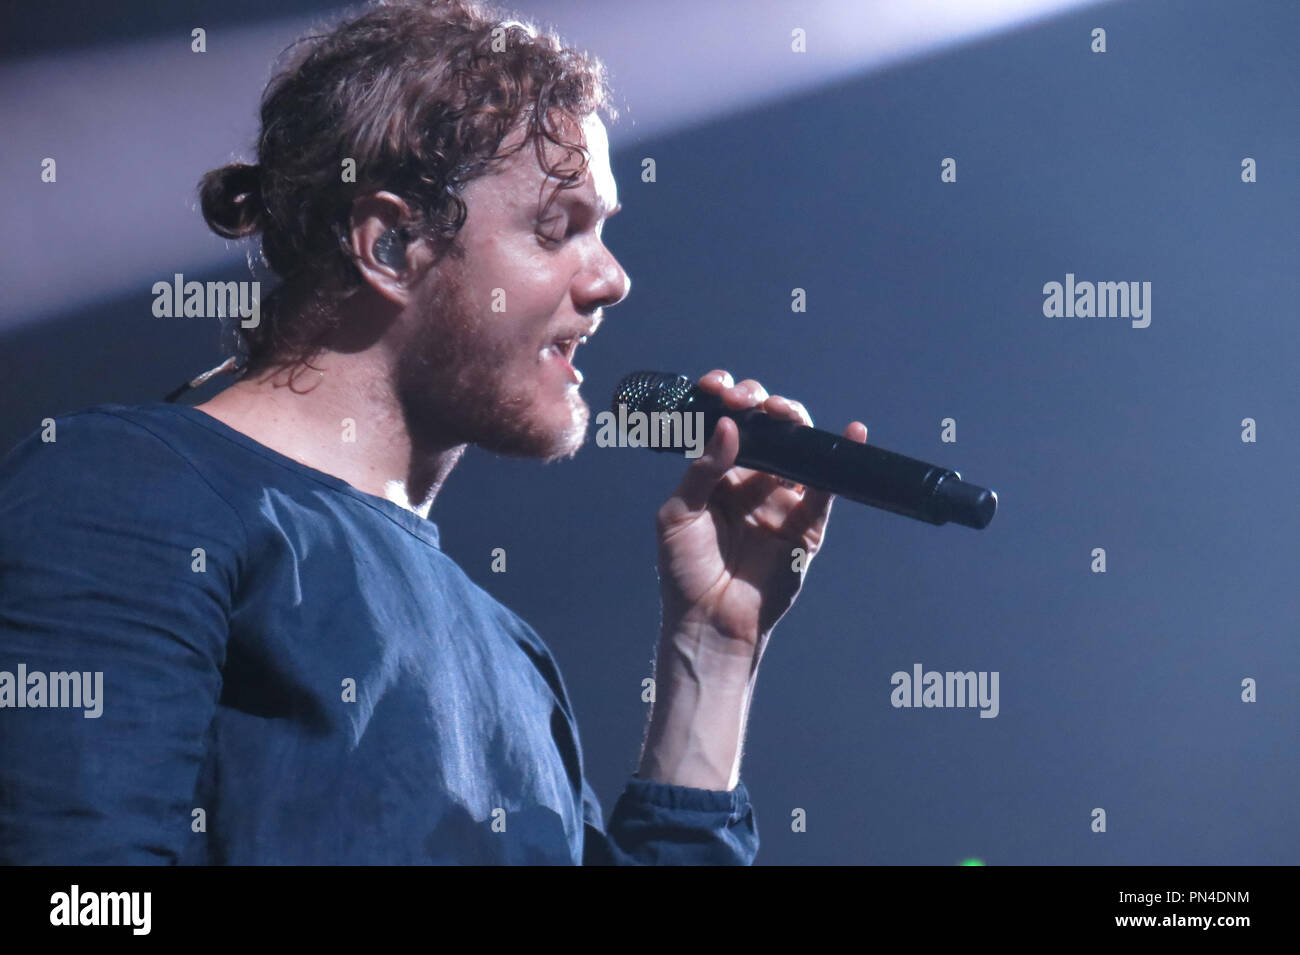 Imagine Dragons Live at the Honda Center in Anaheim, CA, July 20, 2015. Dan Reynolds. Photo by Richard Chavez / PictureLux Stock Photo